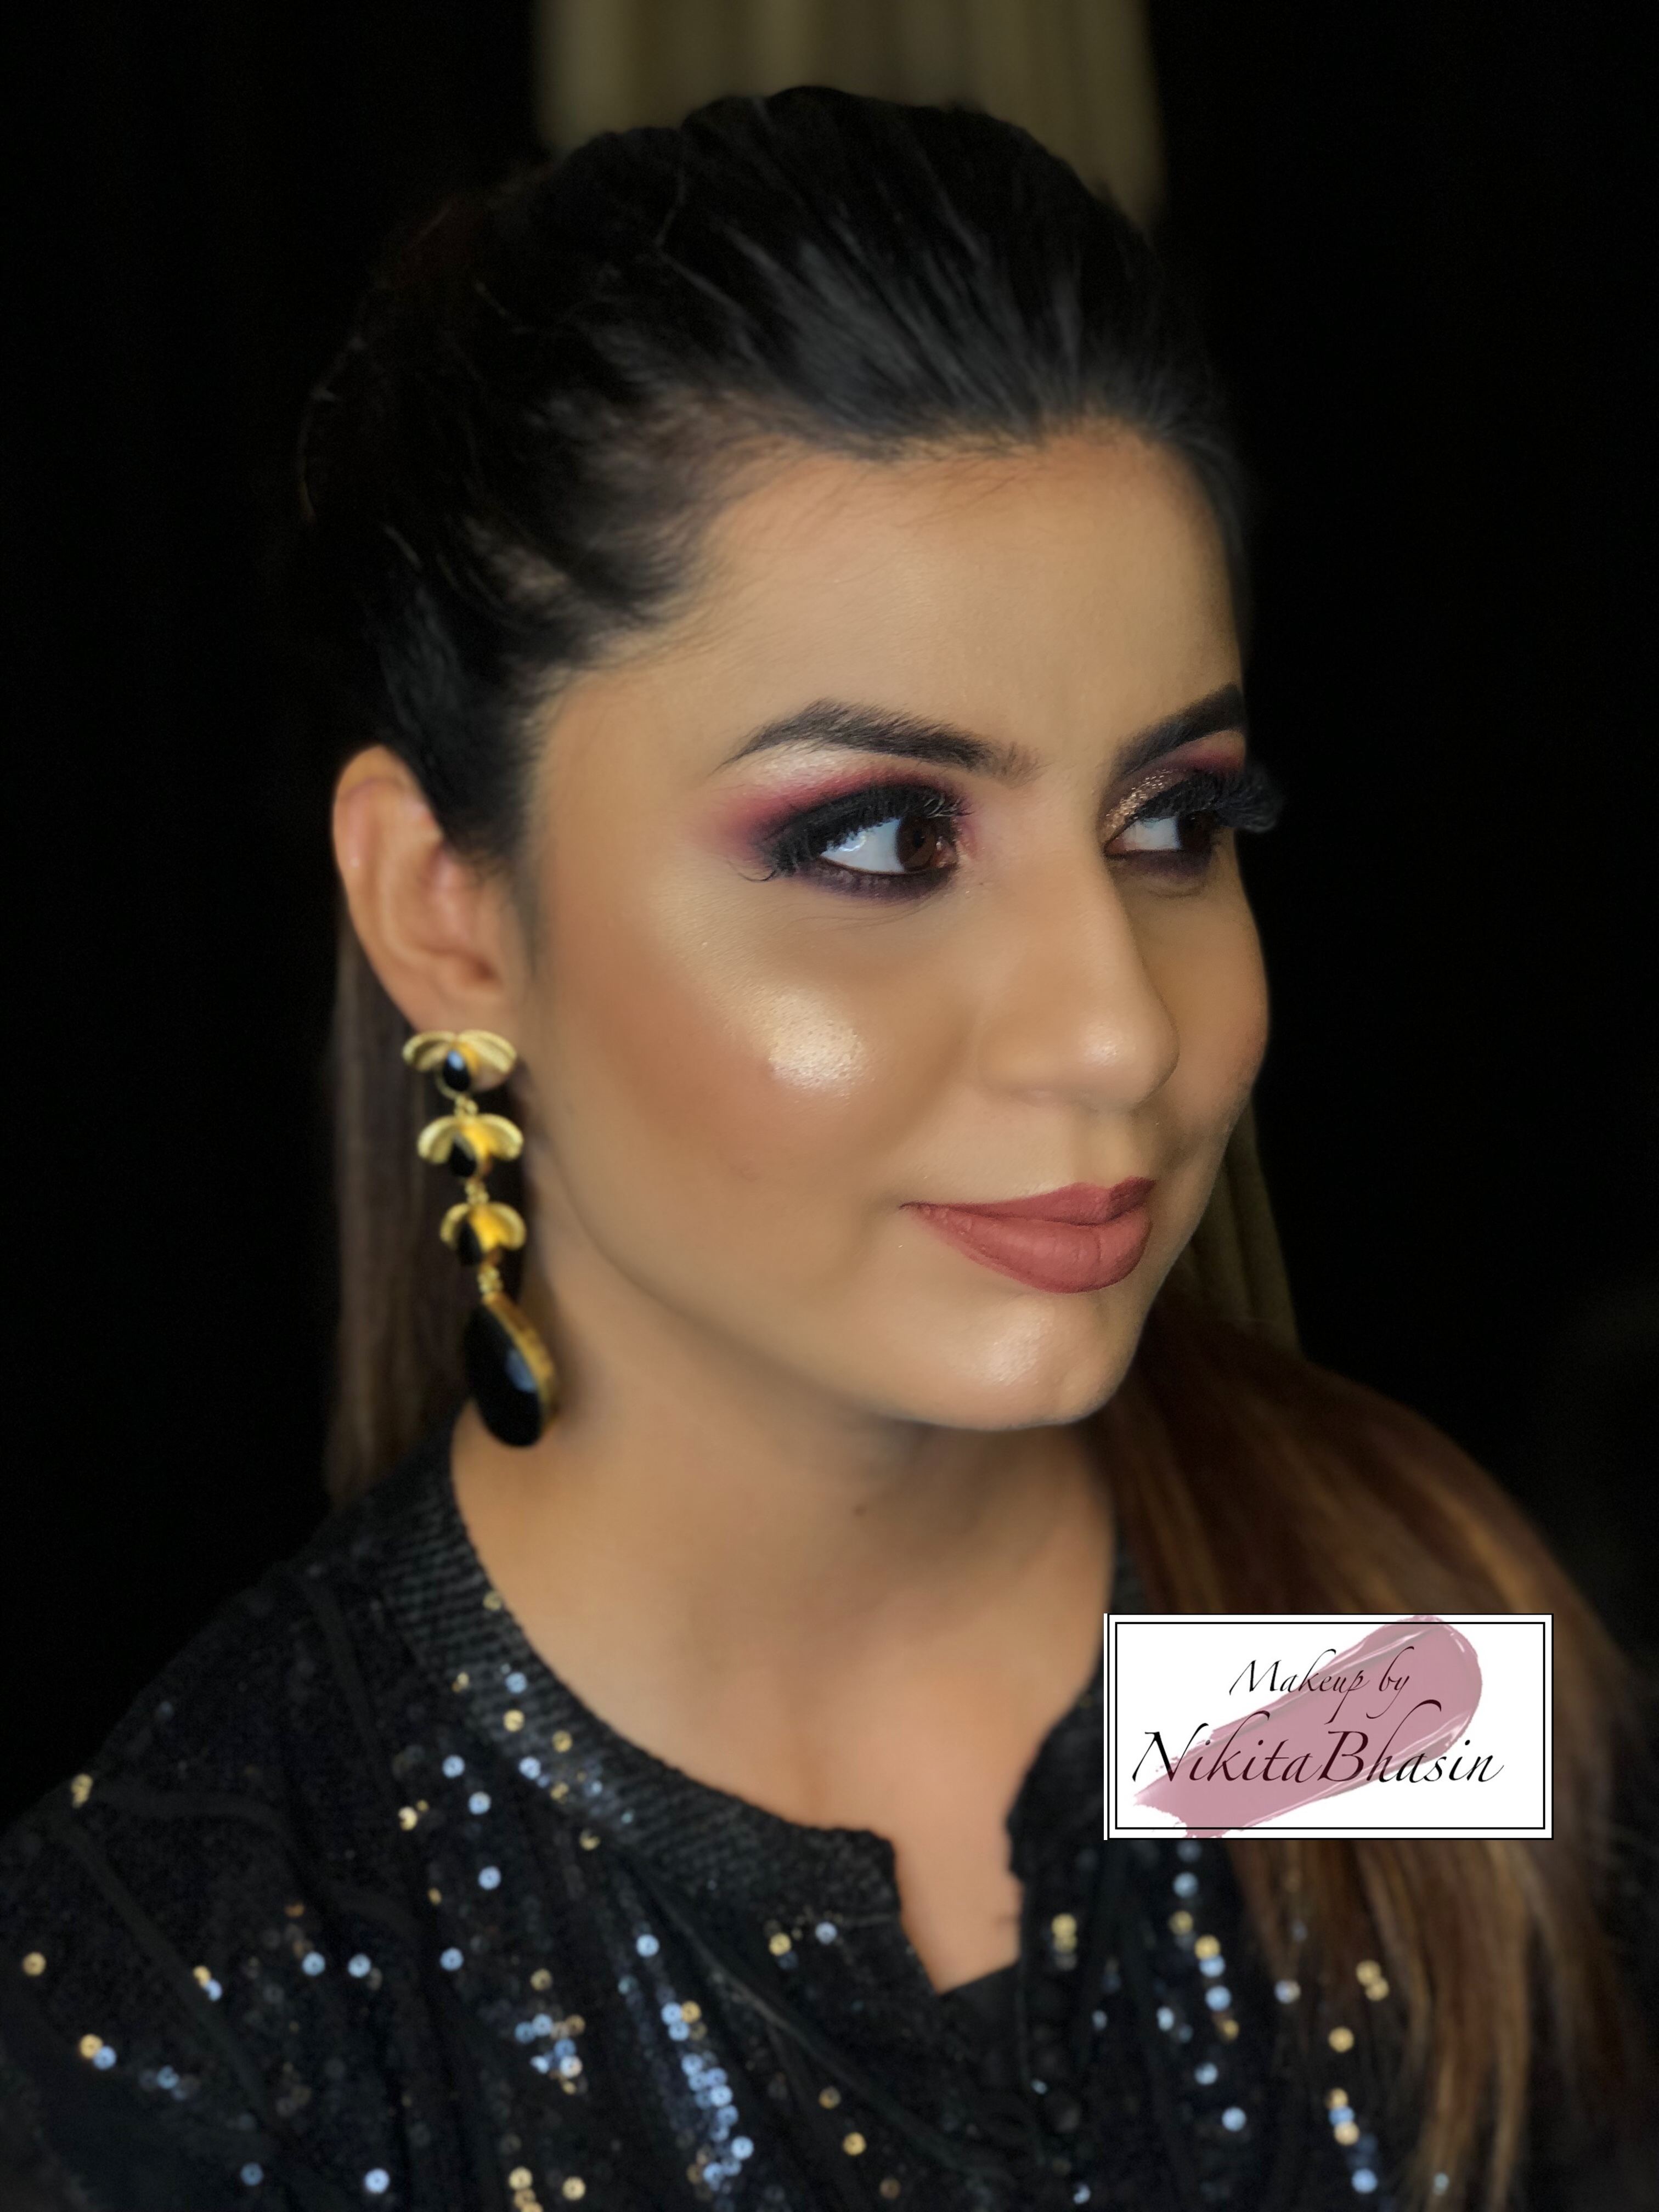 NIKITA BHASIN Makeup Artist Services, Review and Info - Olready